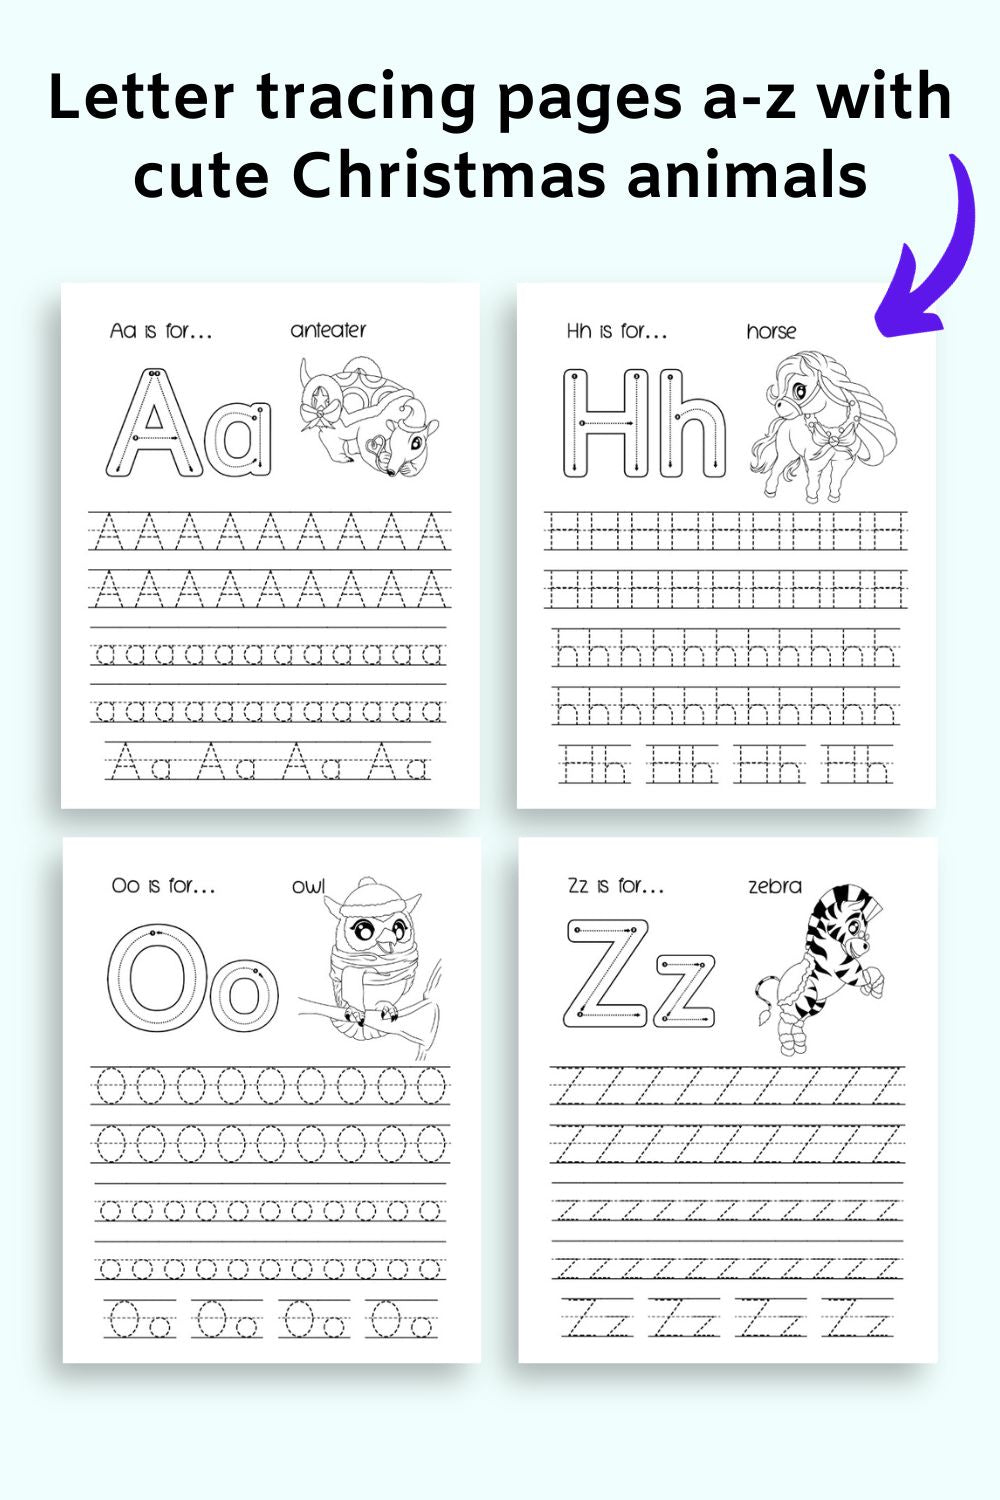 Text "letter tracing pages a-z with cute Christmas animals" and letters a, h, o, and z